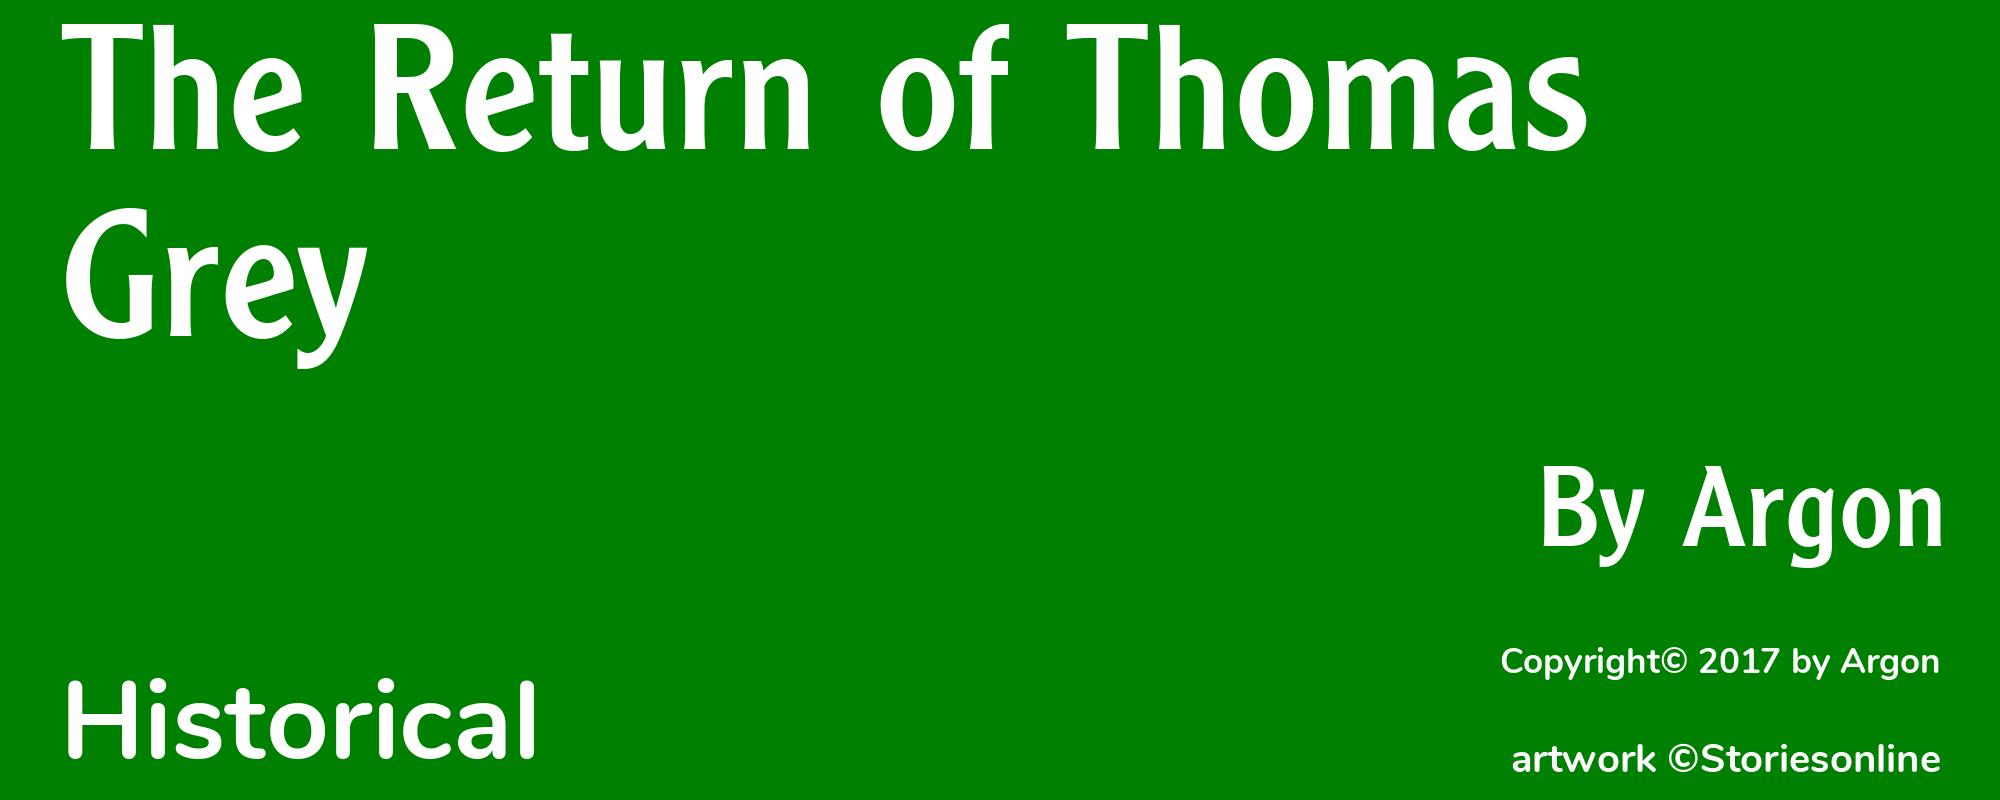 The Return of Thomas Grey - Cover